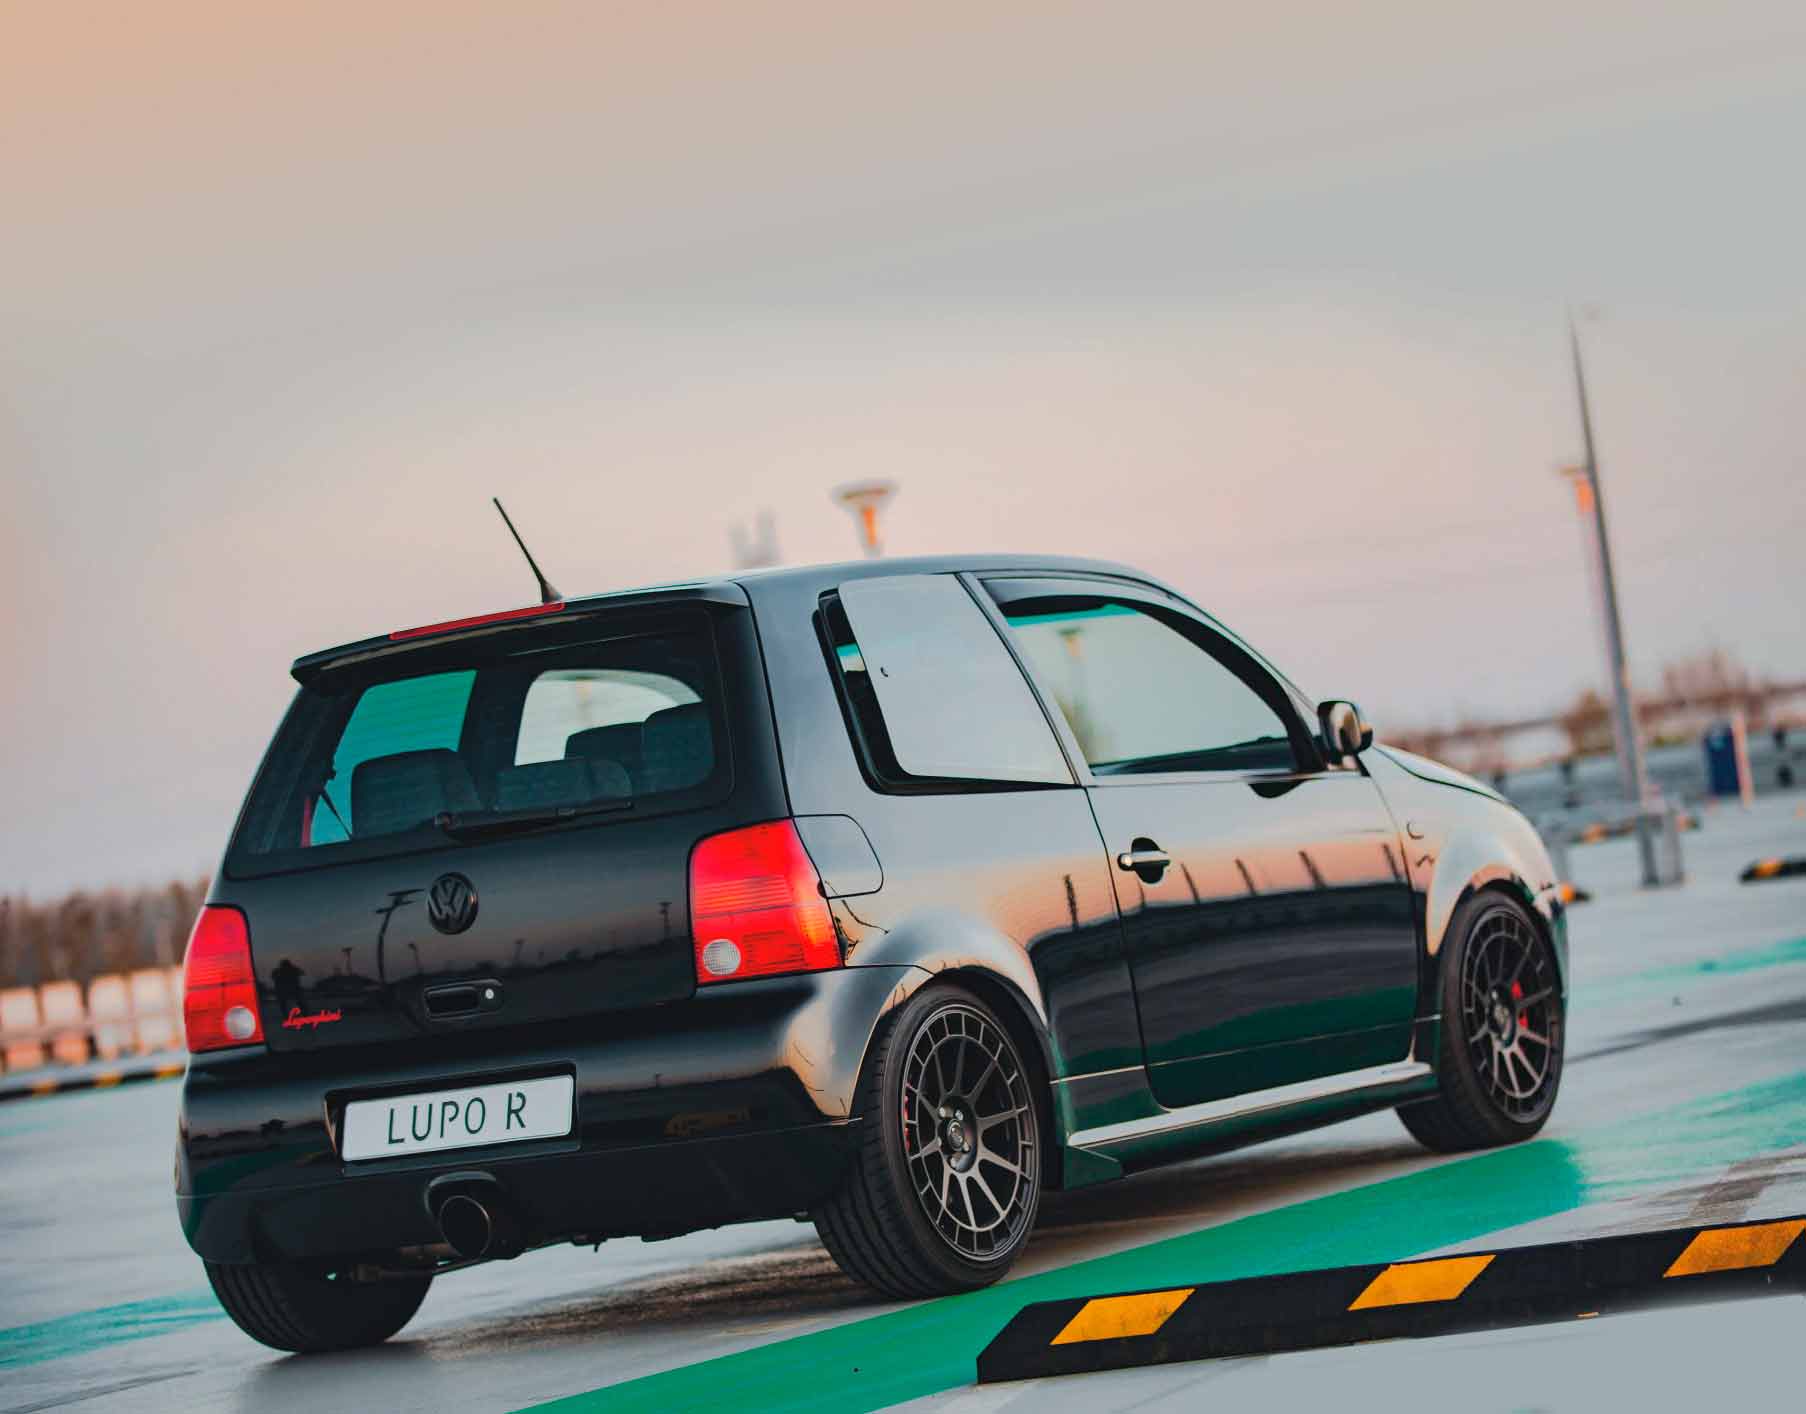 350bhp Tuned Volkswagen Lupo Gti Gets 2 0 Tsi With K04 Turbo Six Speed Gearbox And Mk6 Gti Edition 35 Interior Upgrades Drive My Blogs Drive